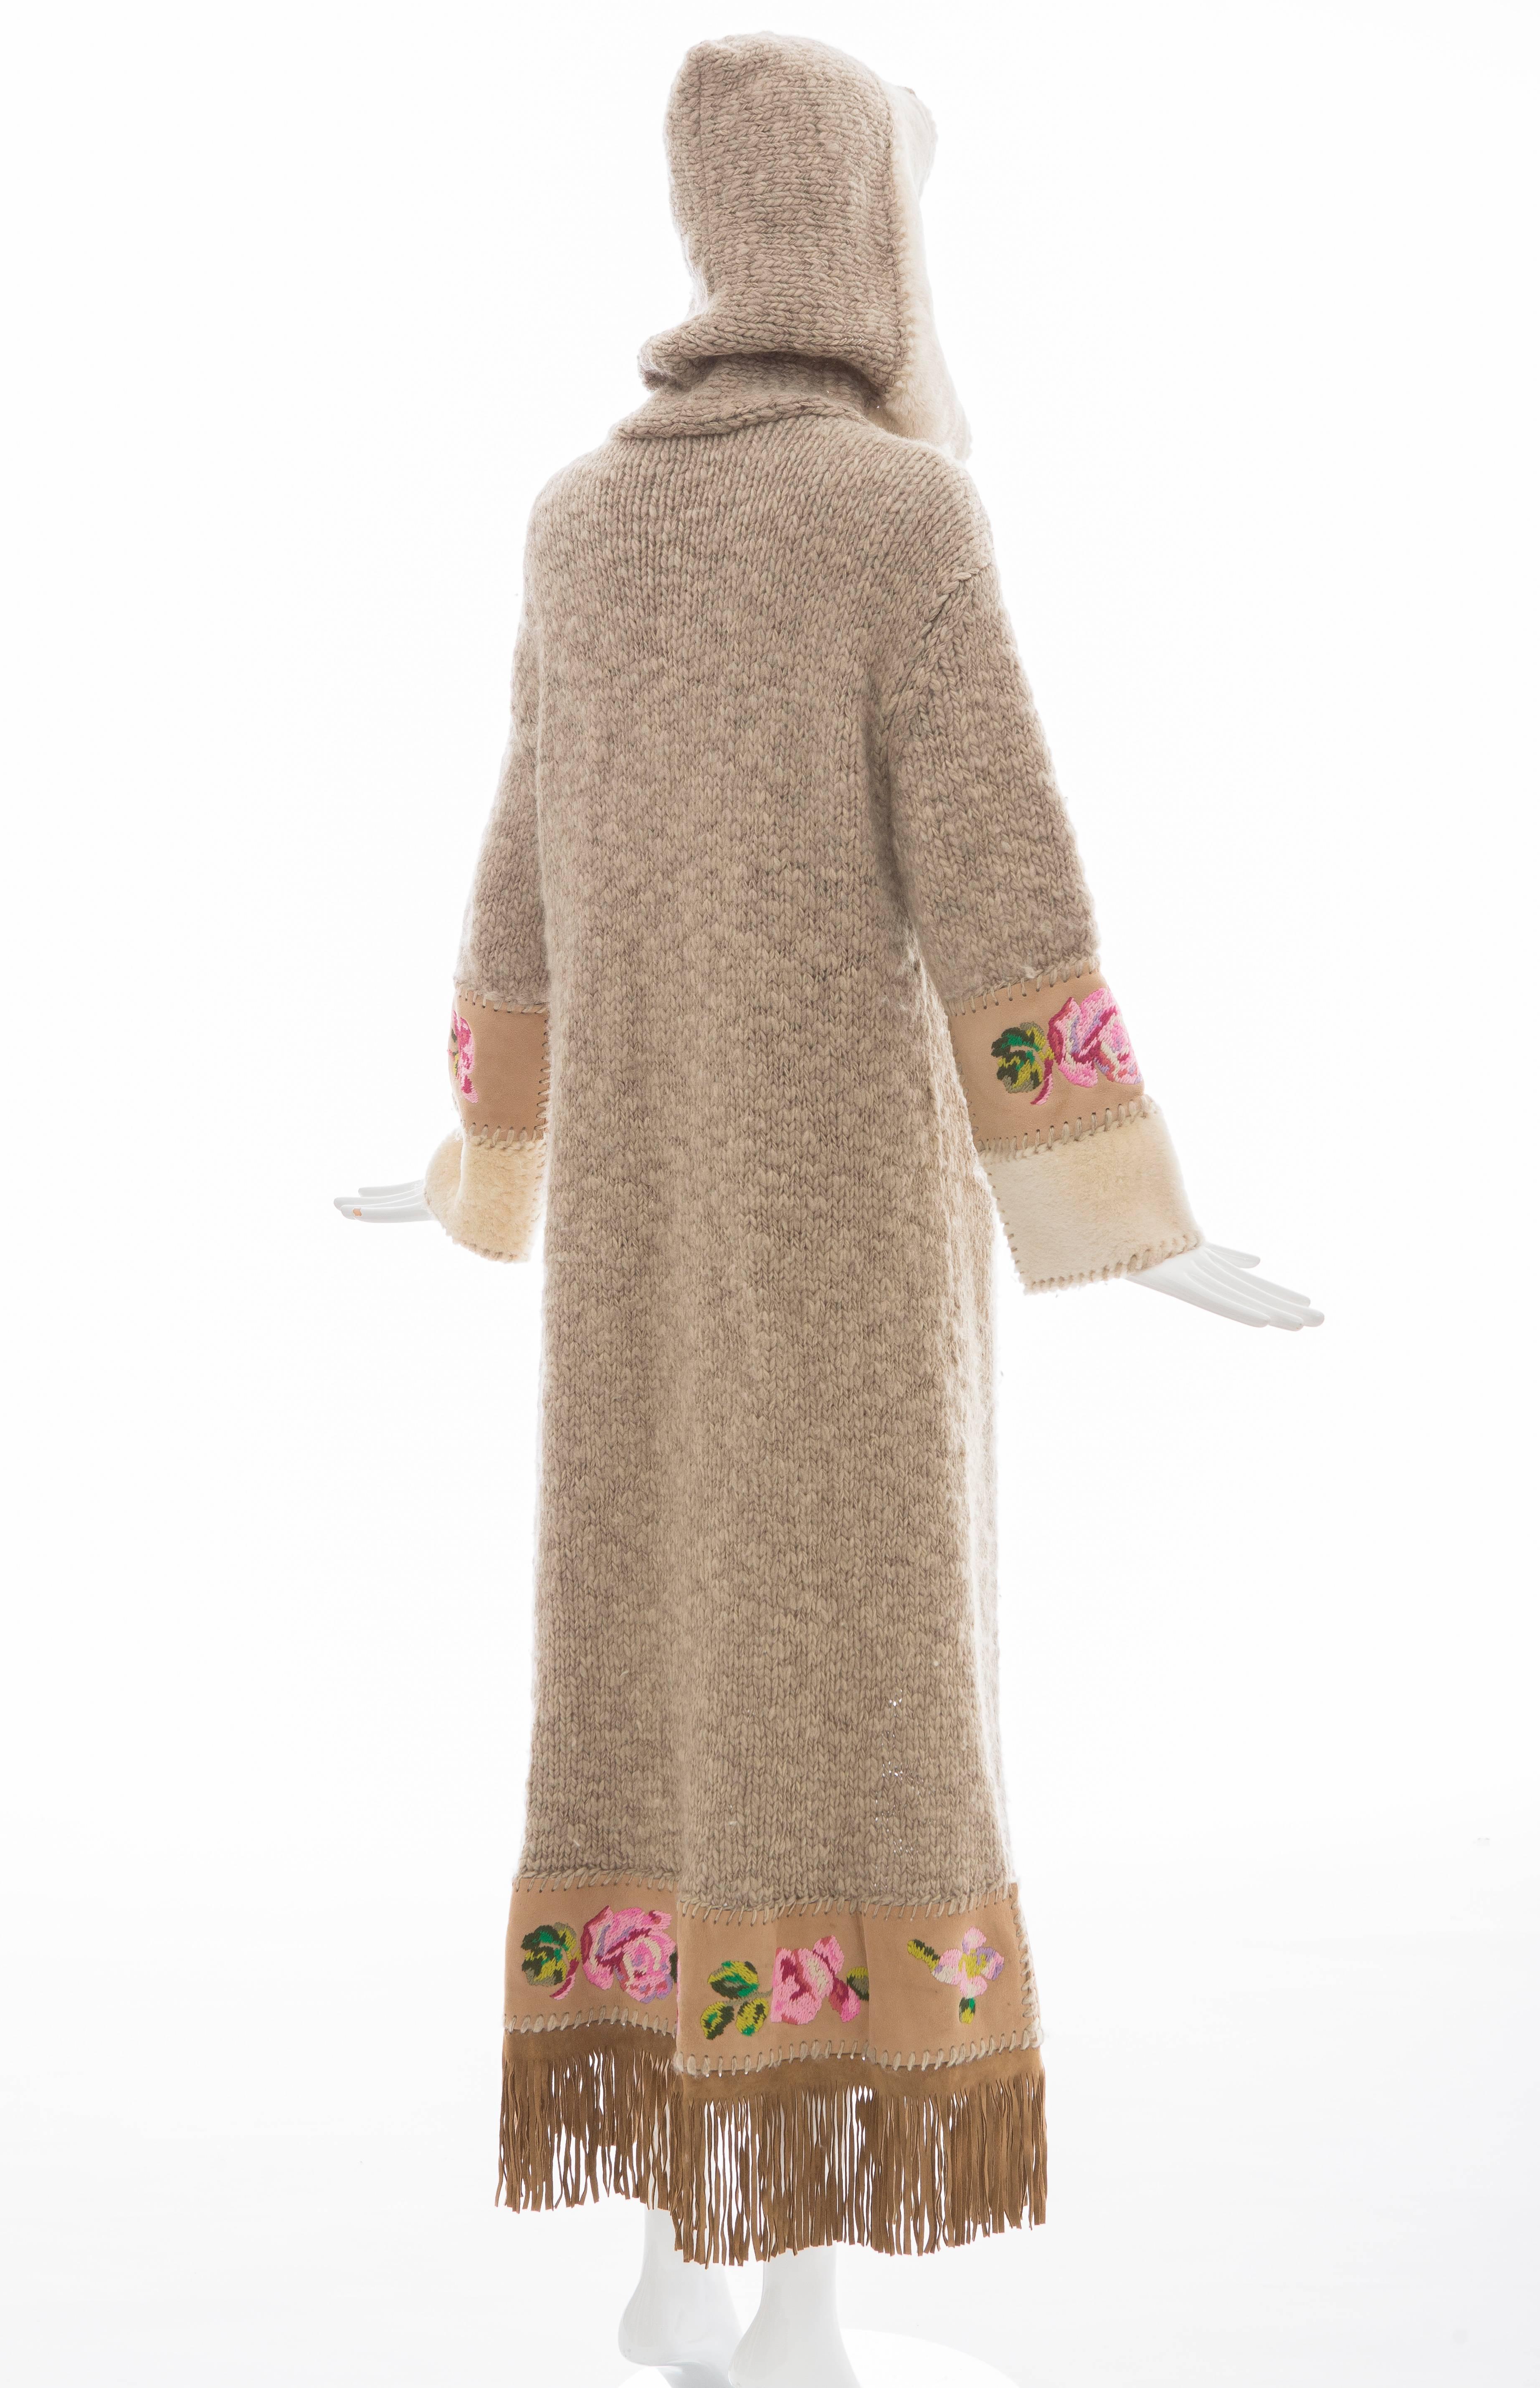 John Galliano For Christian Dior Shearling Duster With Embroidered Suede Trim 1